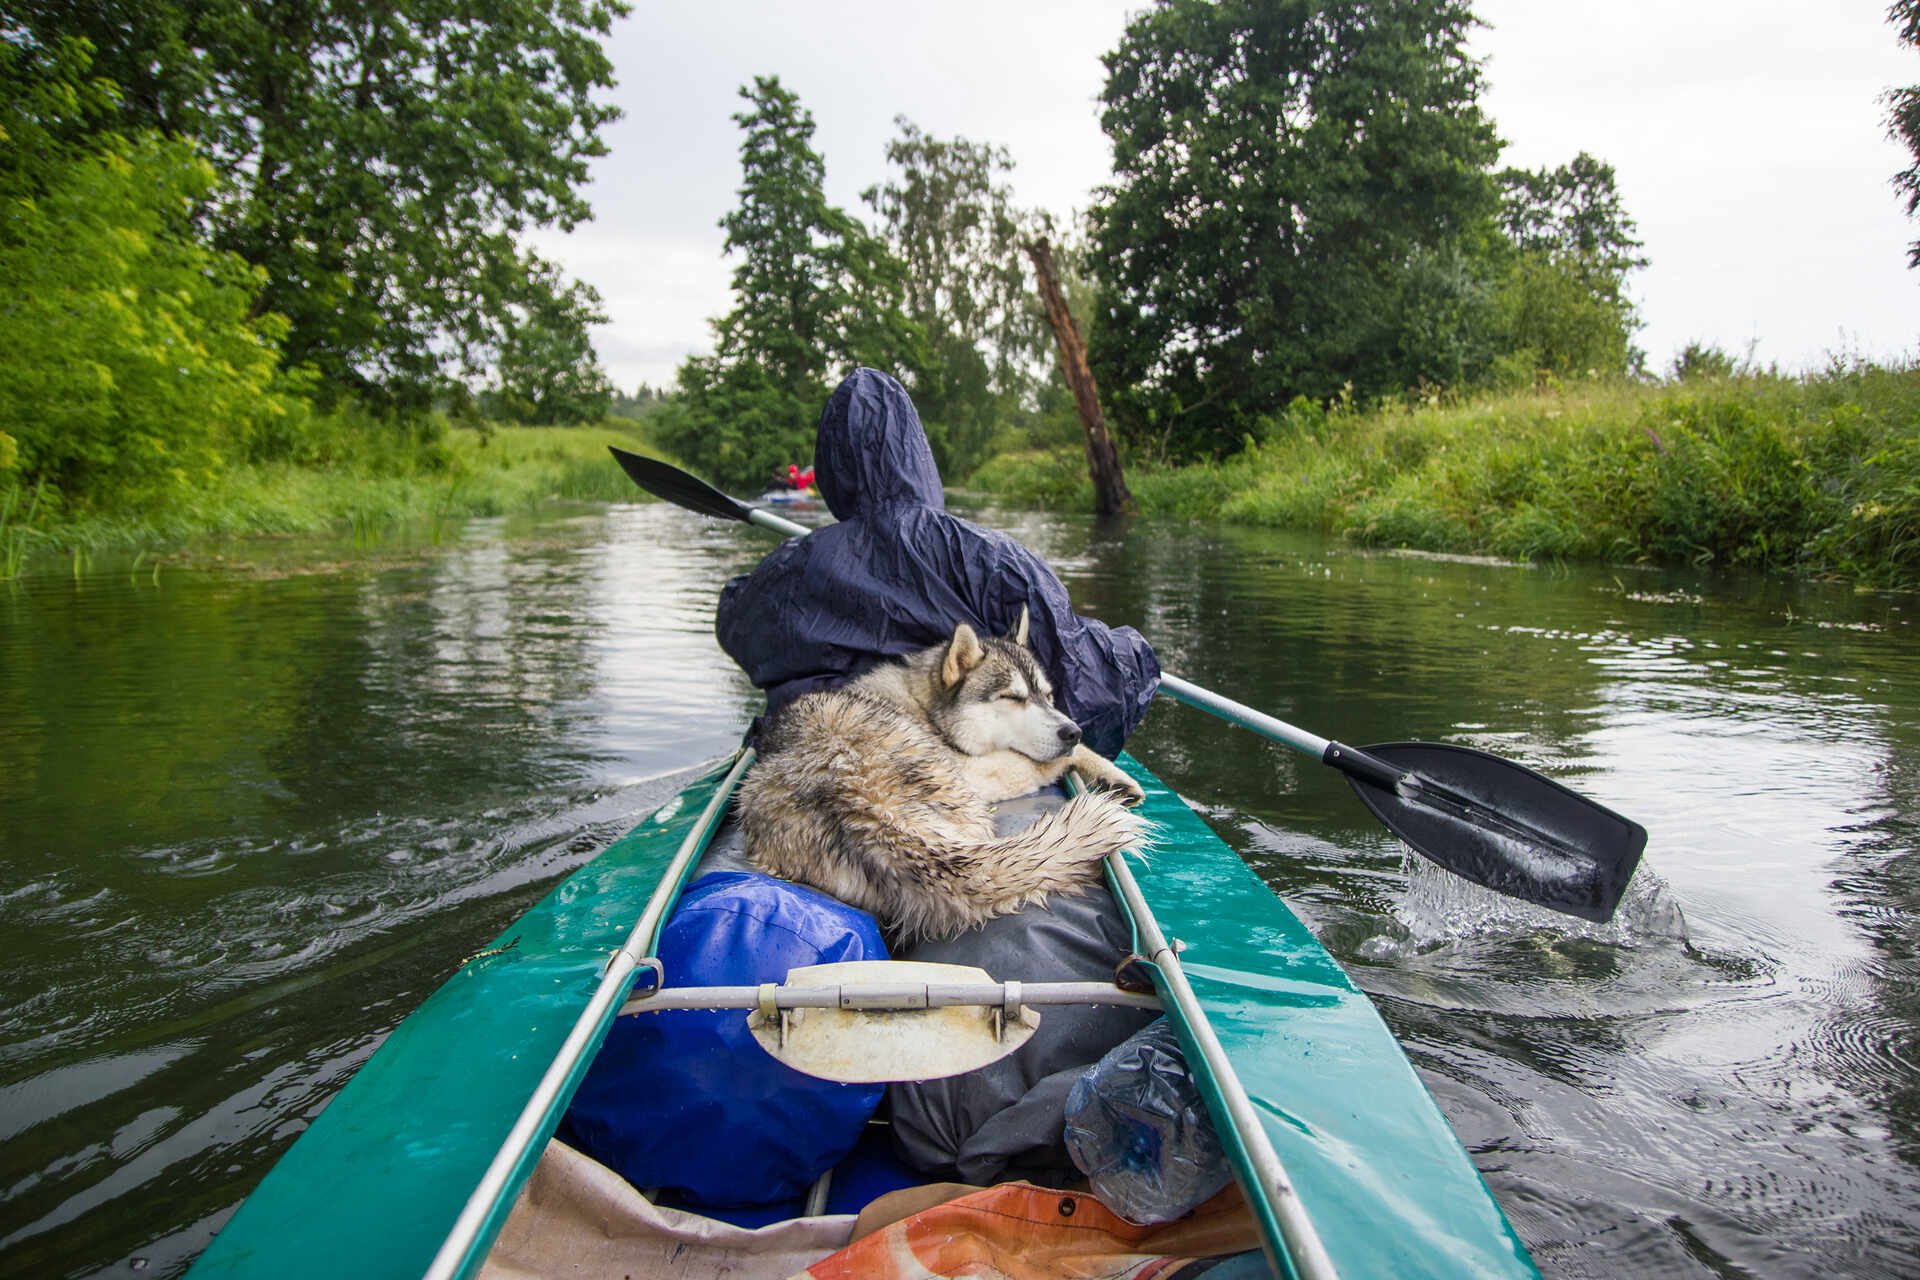 A man canoeing in a river with a dog 